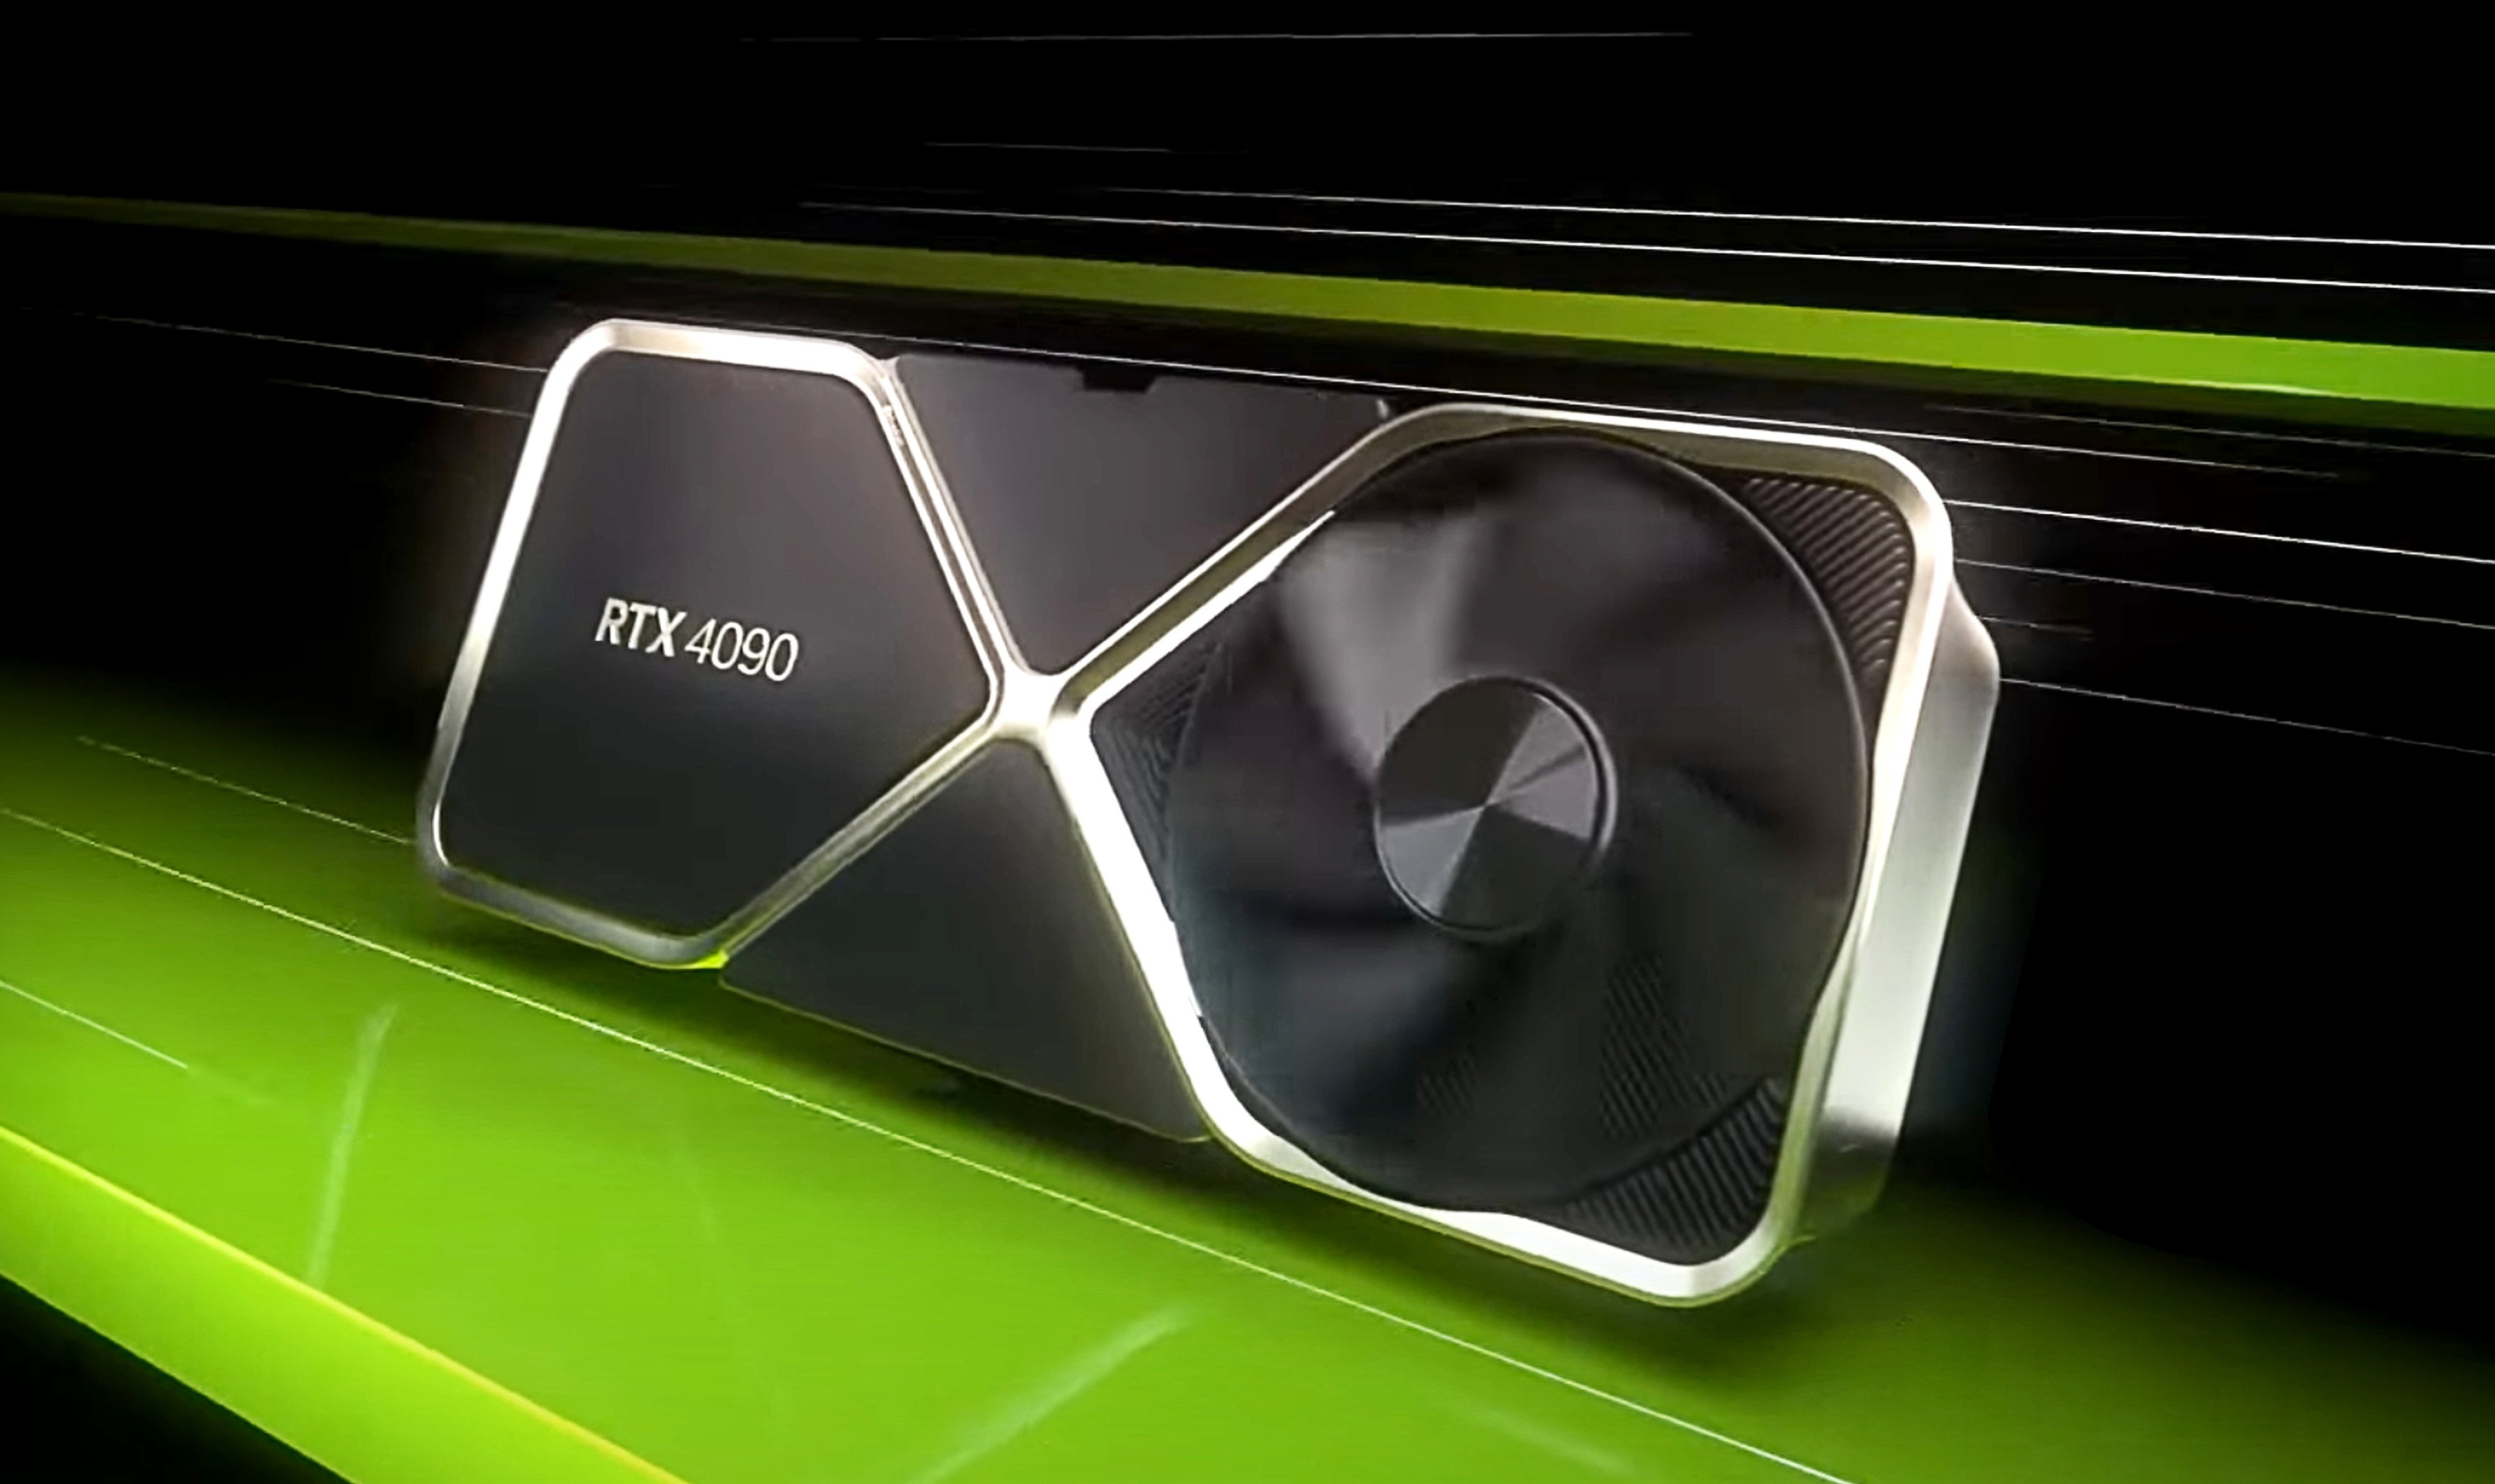 Nvidia’s GeForce RTX 4090 is the most coveted graphics card in mainland China. Photo: Nvidia